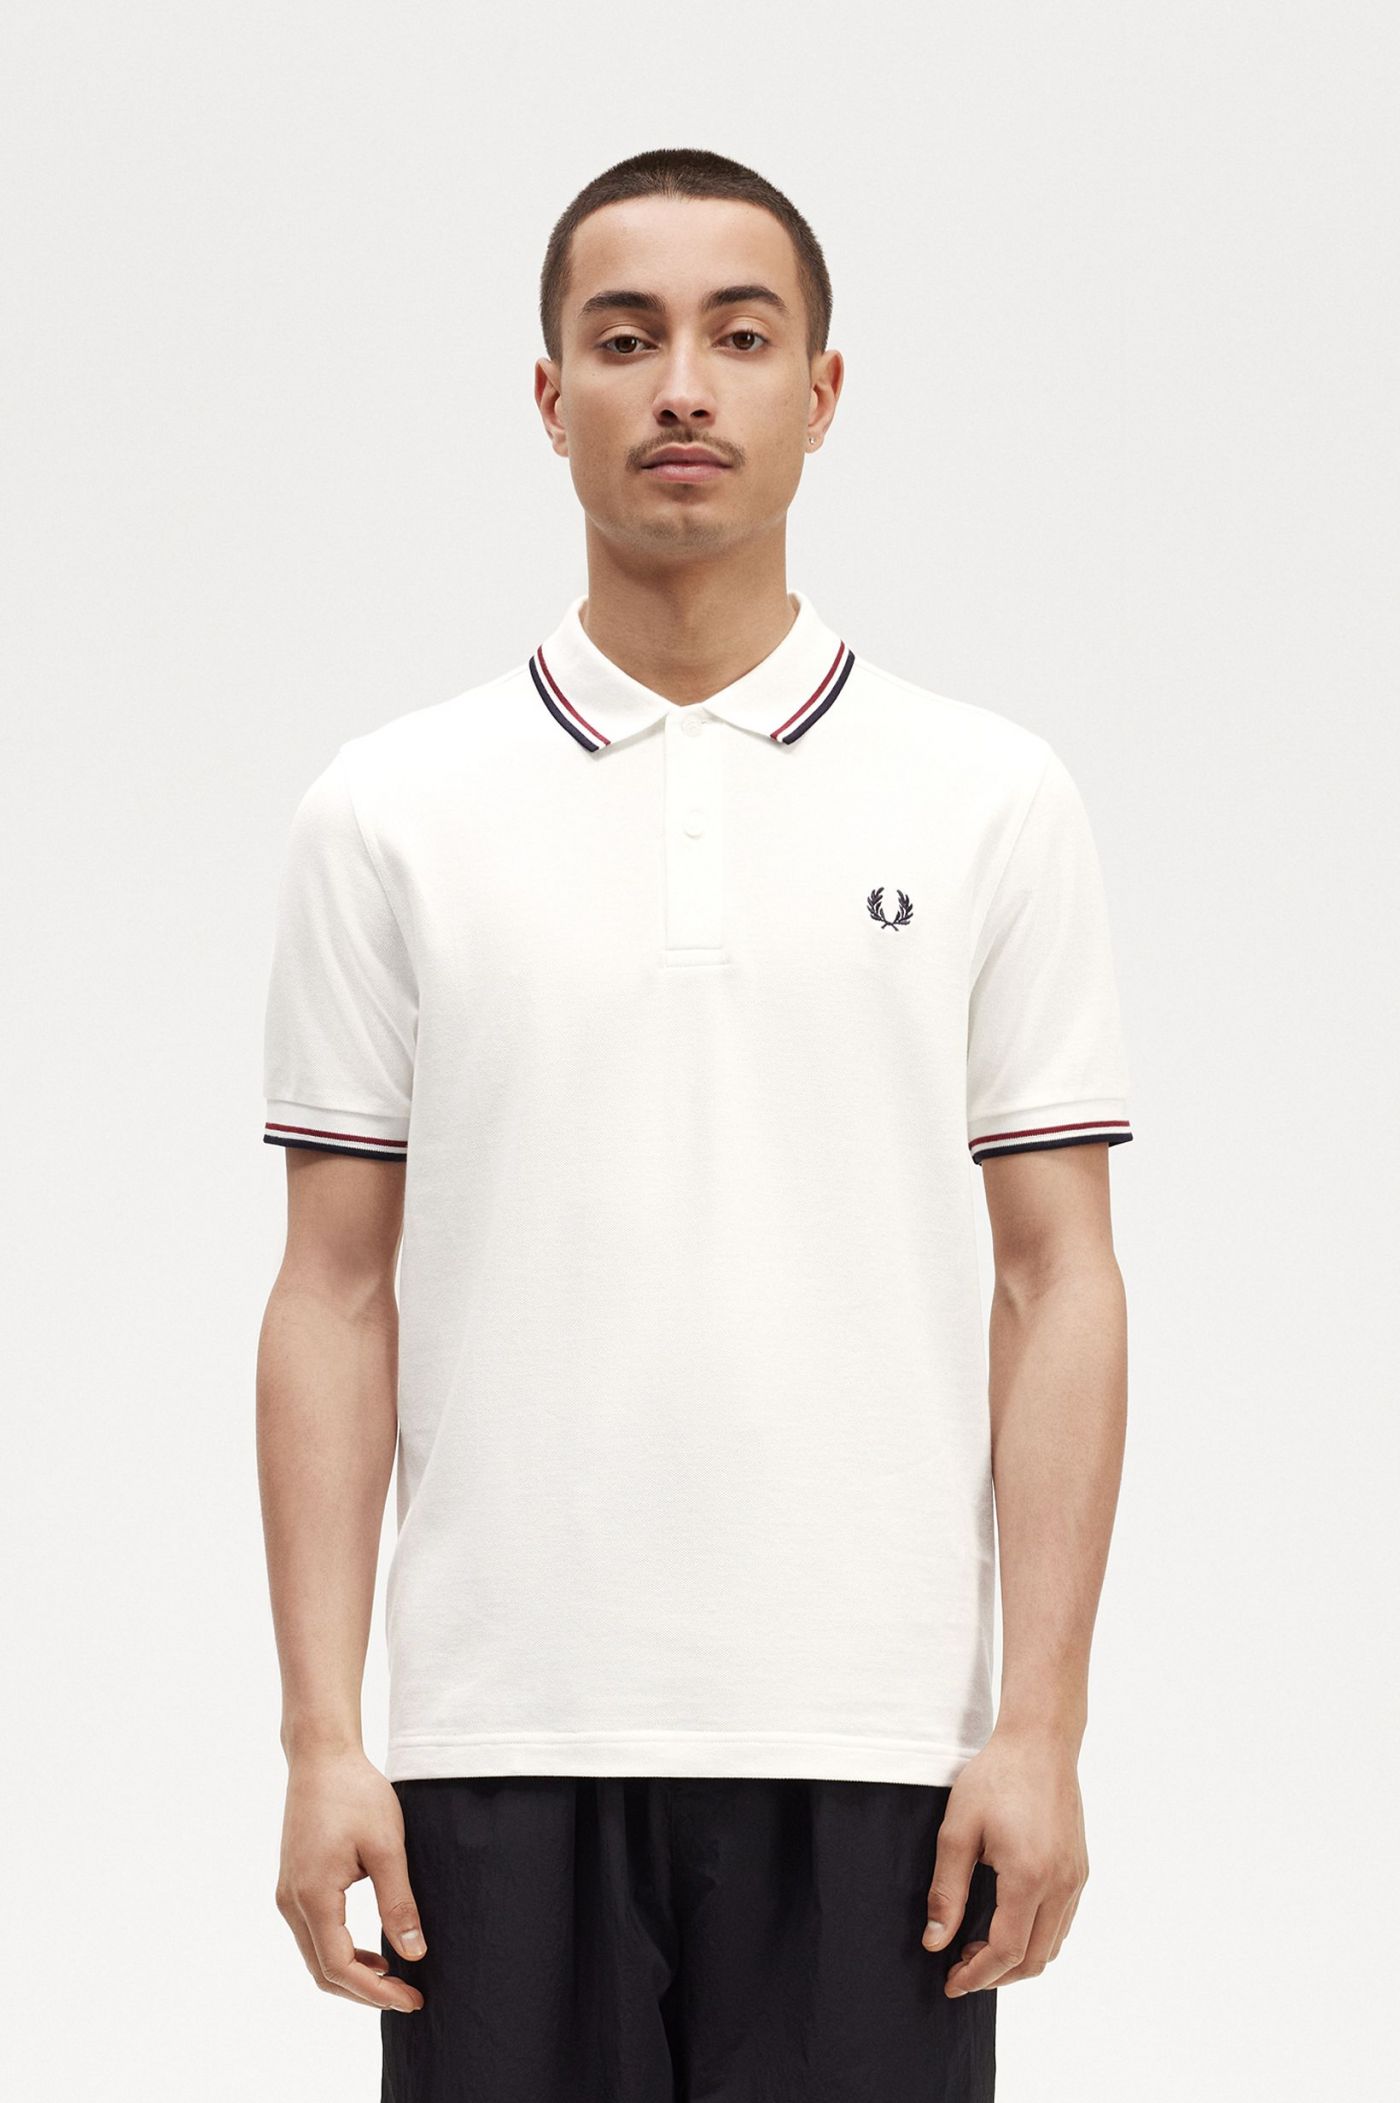 Jersey Fred Perry Hombre Blanco Ref.2141